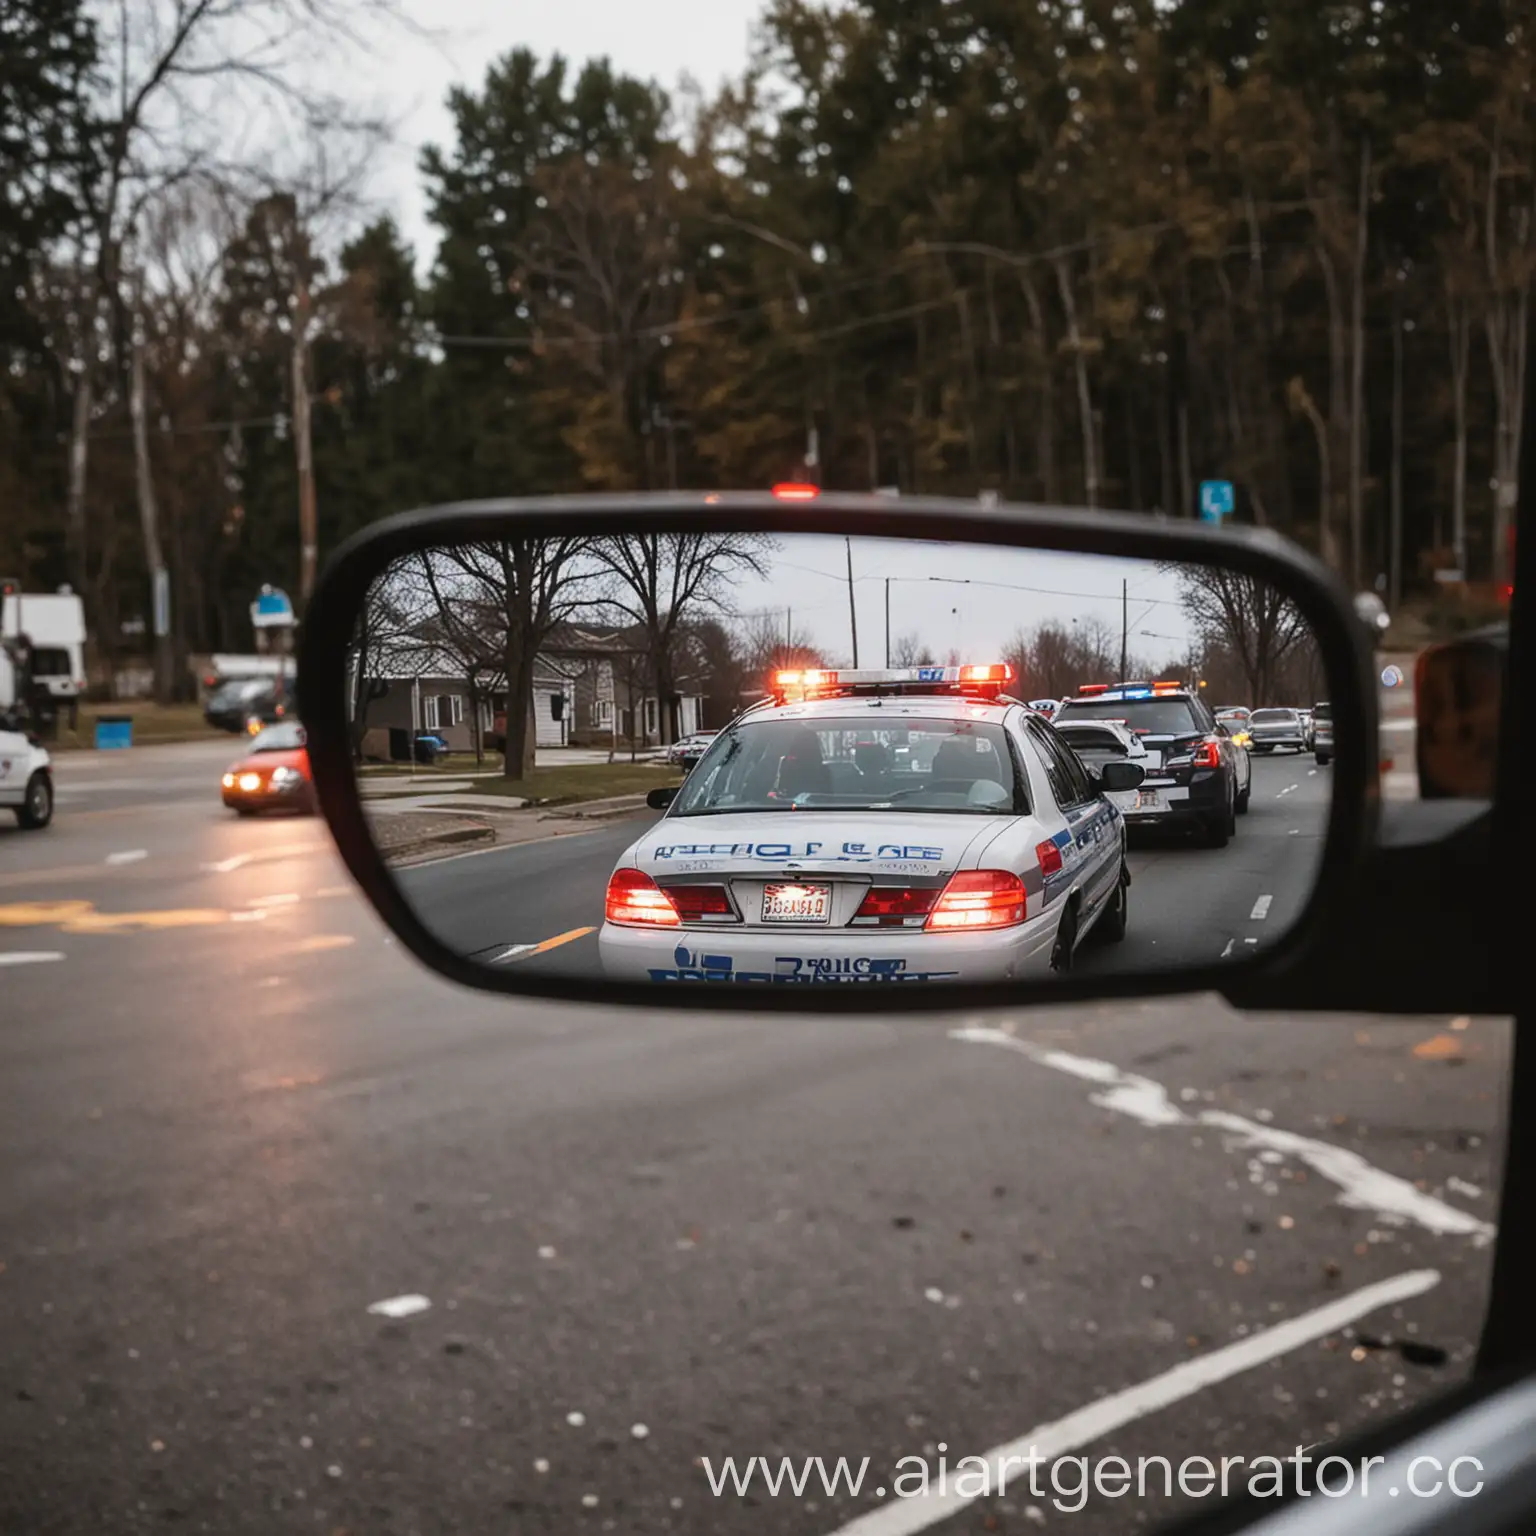 View-of-Police-Car-with-Flashing-Lights-in-Rearview-Mirror